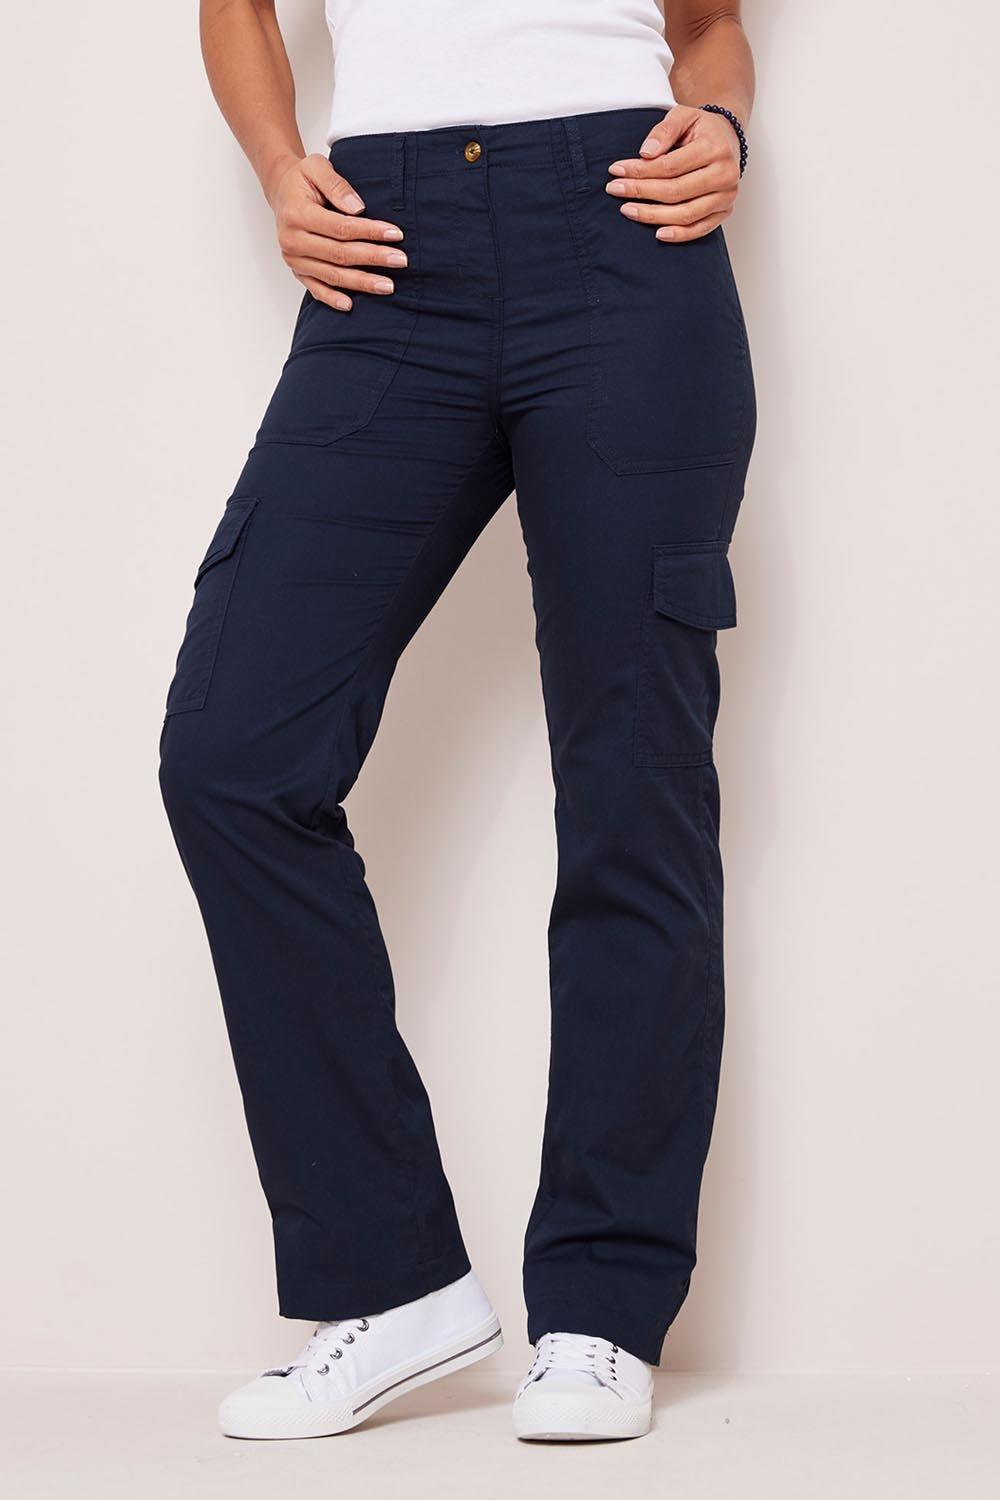 Traders Navy Cargo Reflective Work Trousers - Lowes Menswear